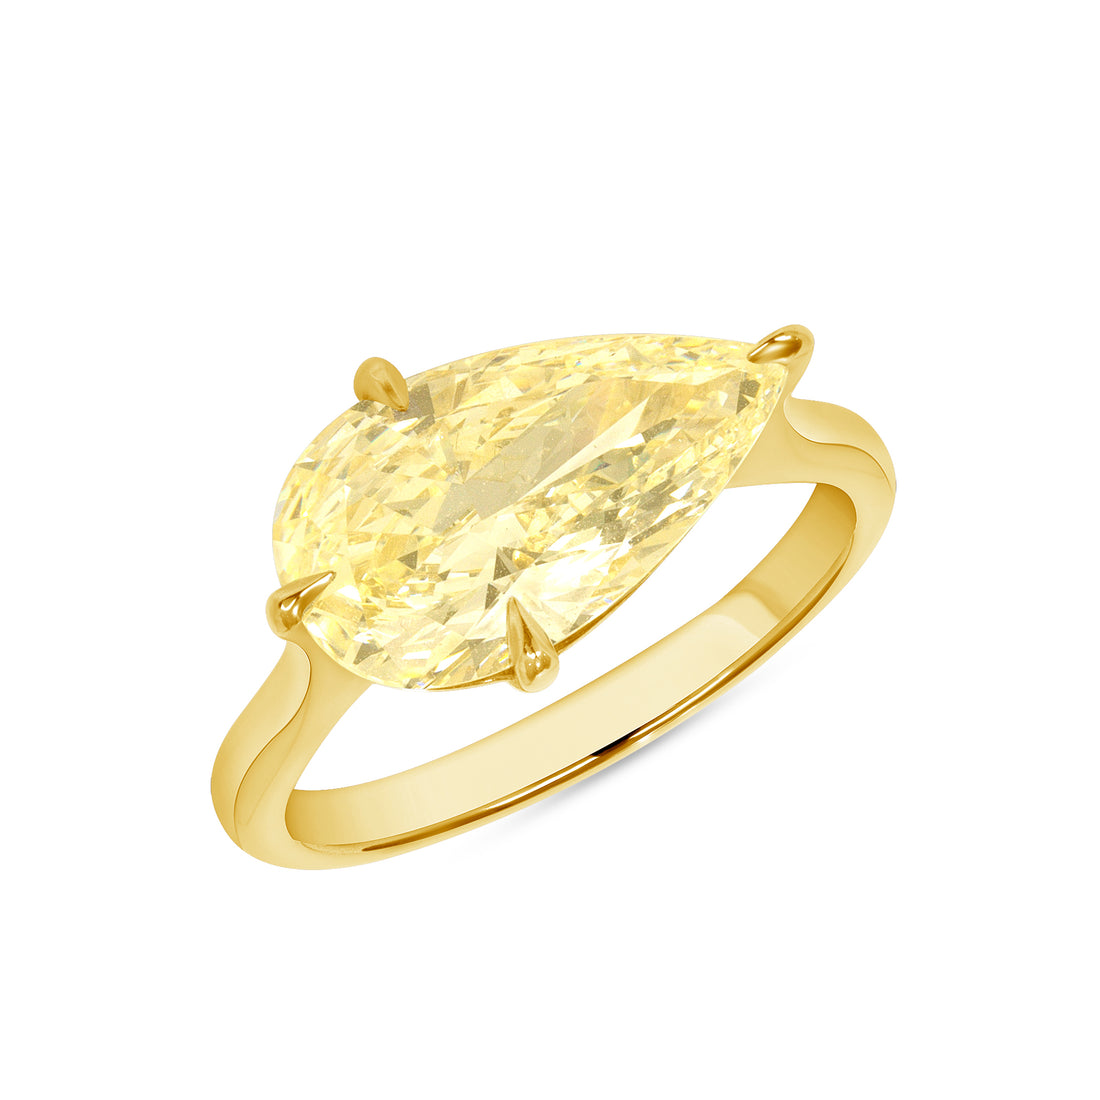 Light Yellow Diamond East West Ring in 14k Yellow Gold